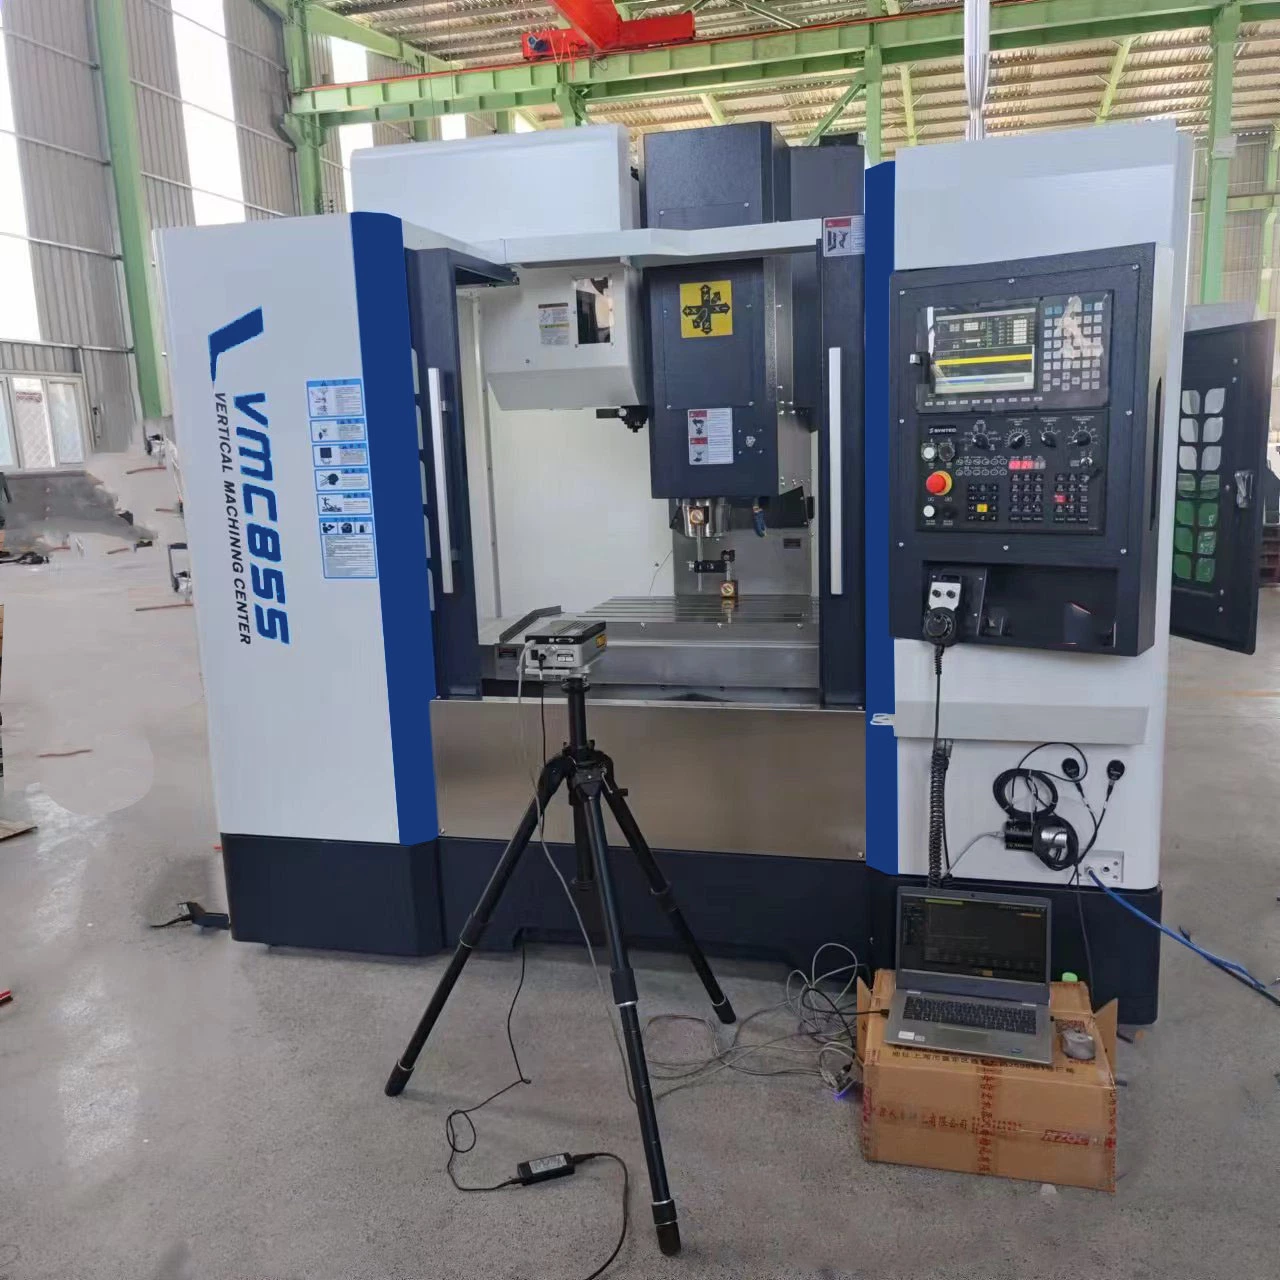 4/5 Axis Machinery CNC Vertical (Bare) Machine Center Tornos/Fresadora/Milling Center for Metal /Wood Cutting/Drilling/Router/Engraving/Turning Vmc850